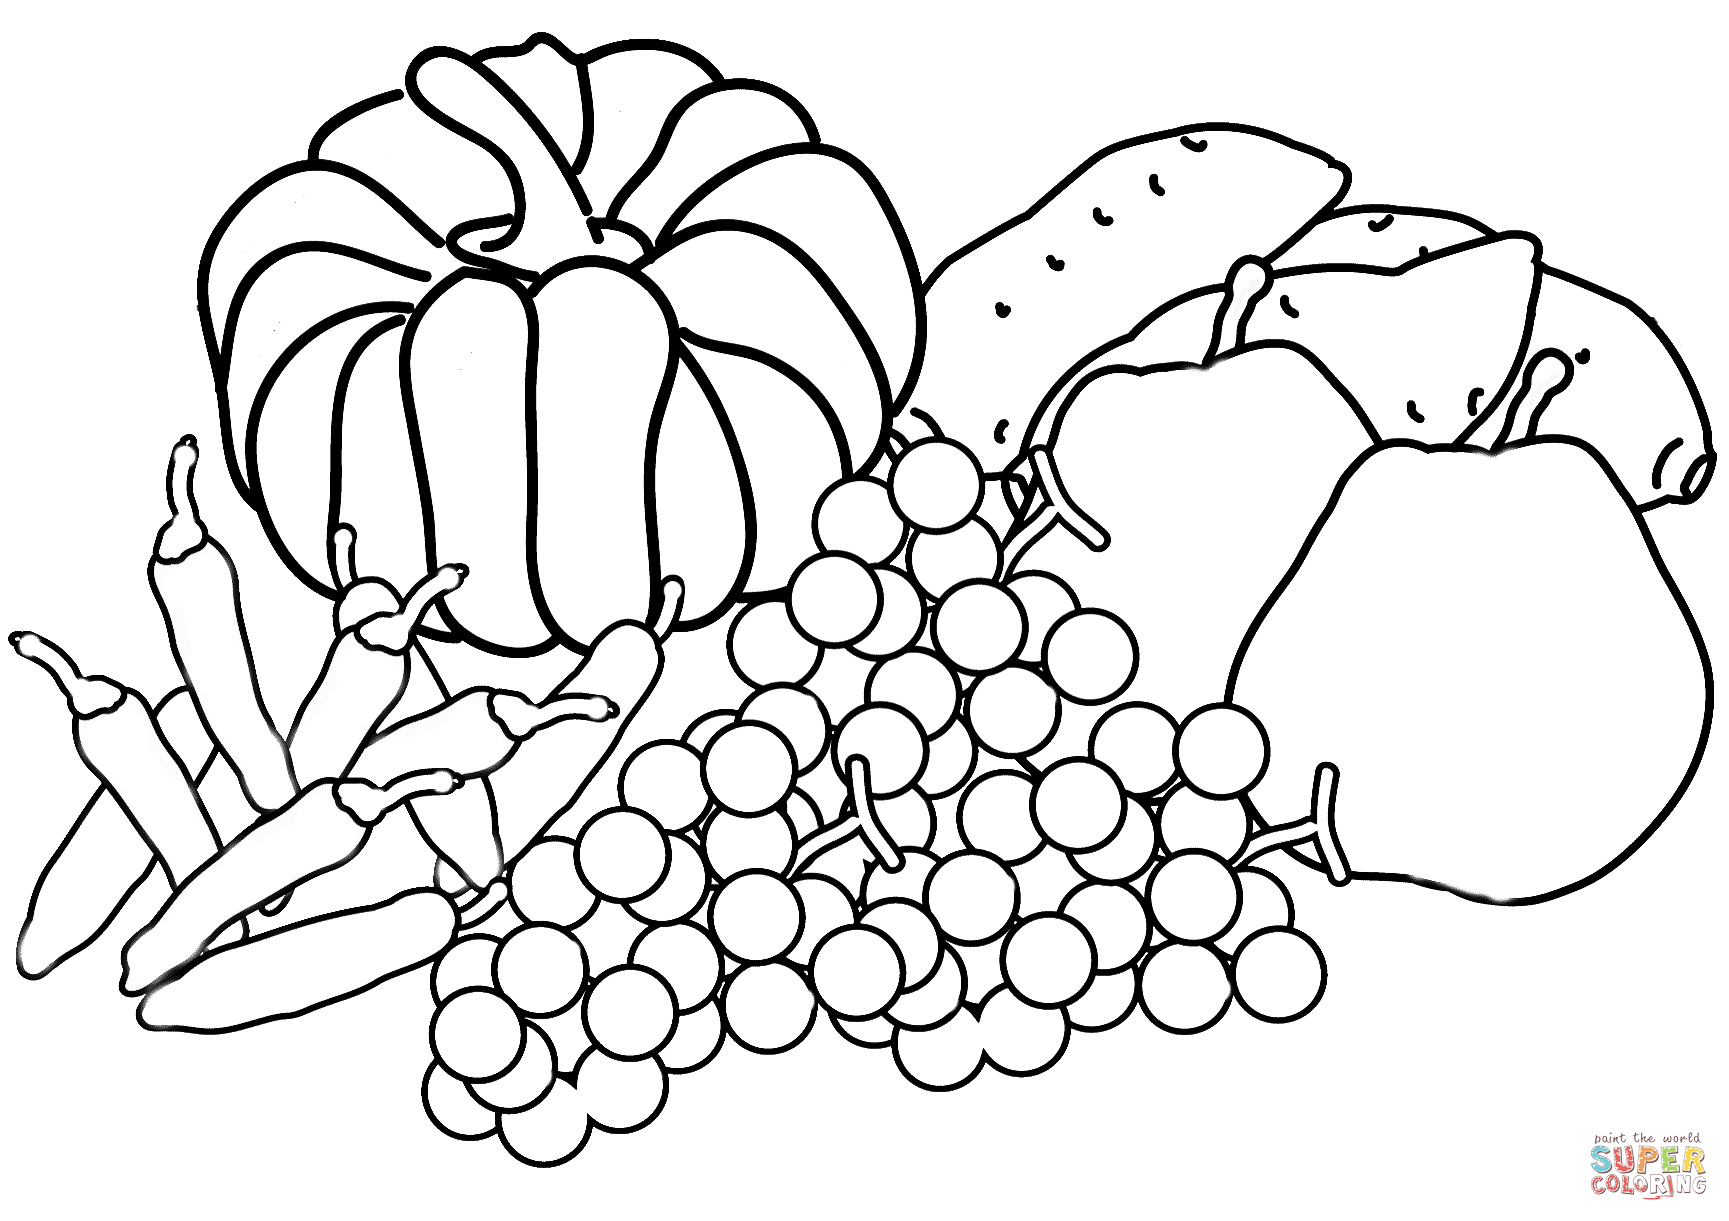 Autumn Harvest Coloring Page | Free Printable Coloring Pages - Free Printable Fall Harvest Coloring Pages